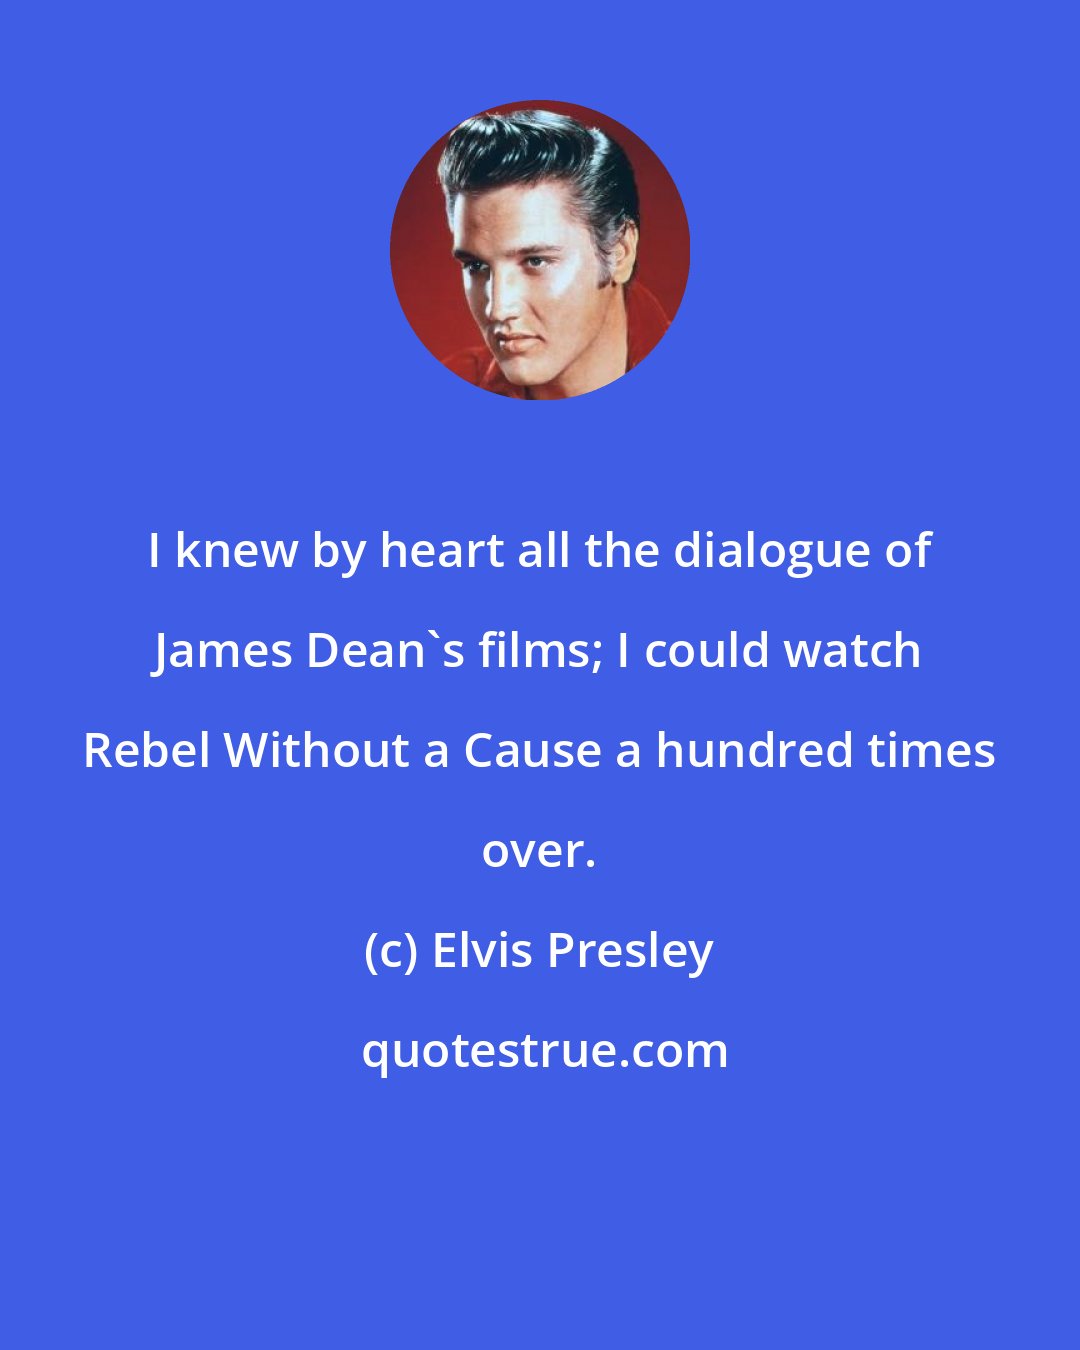 Elvis Presley: I knew by heart all the dialogue of James Dean's films; I could watch Rebel Without a Cause a hundred times over.